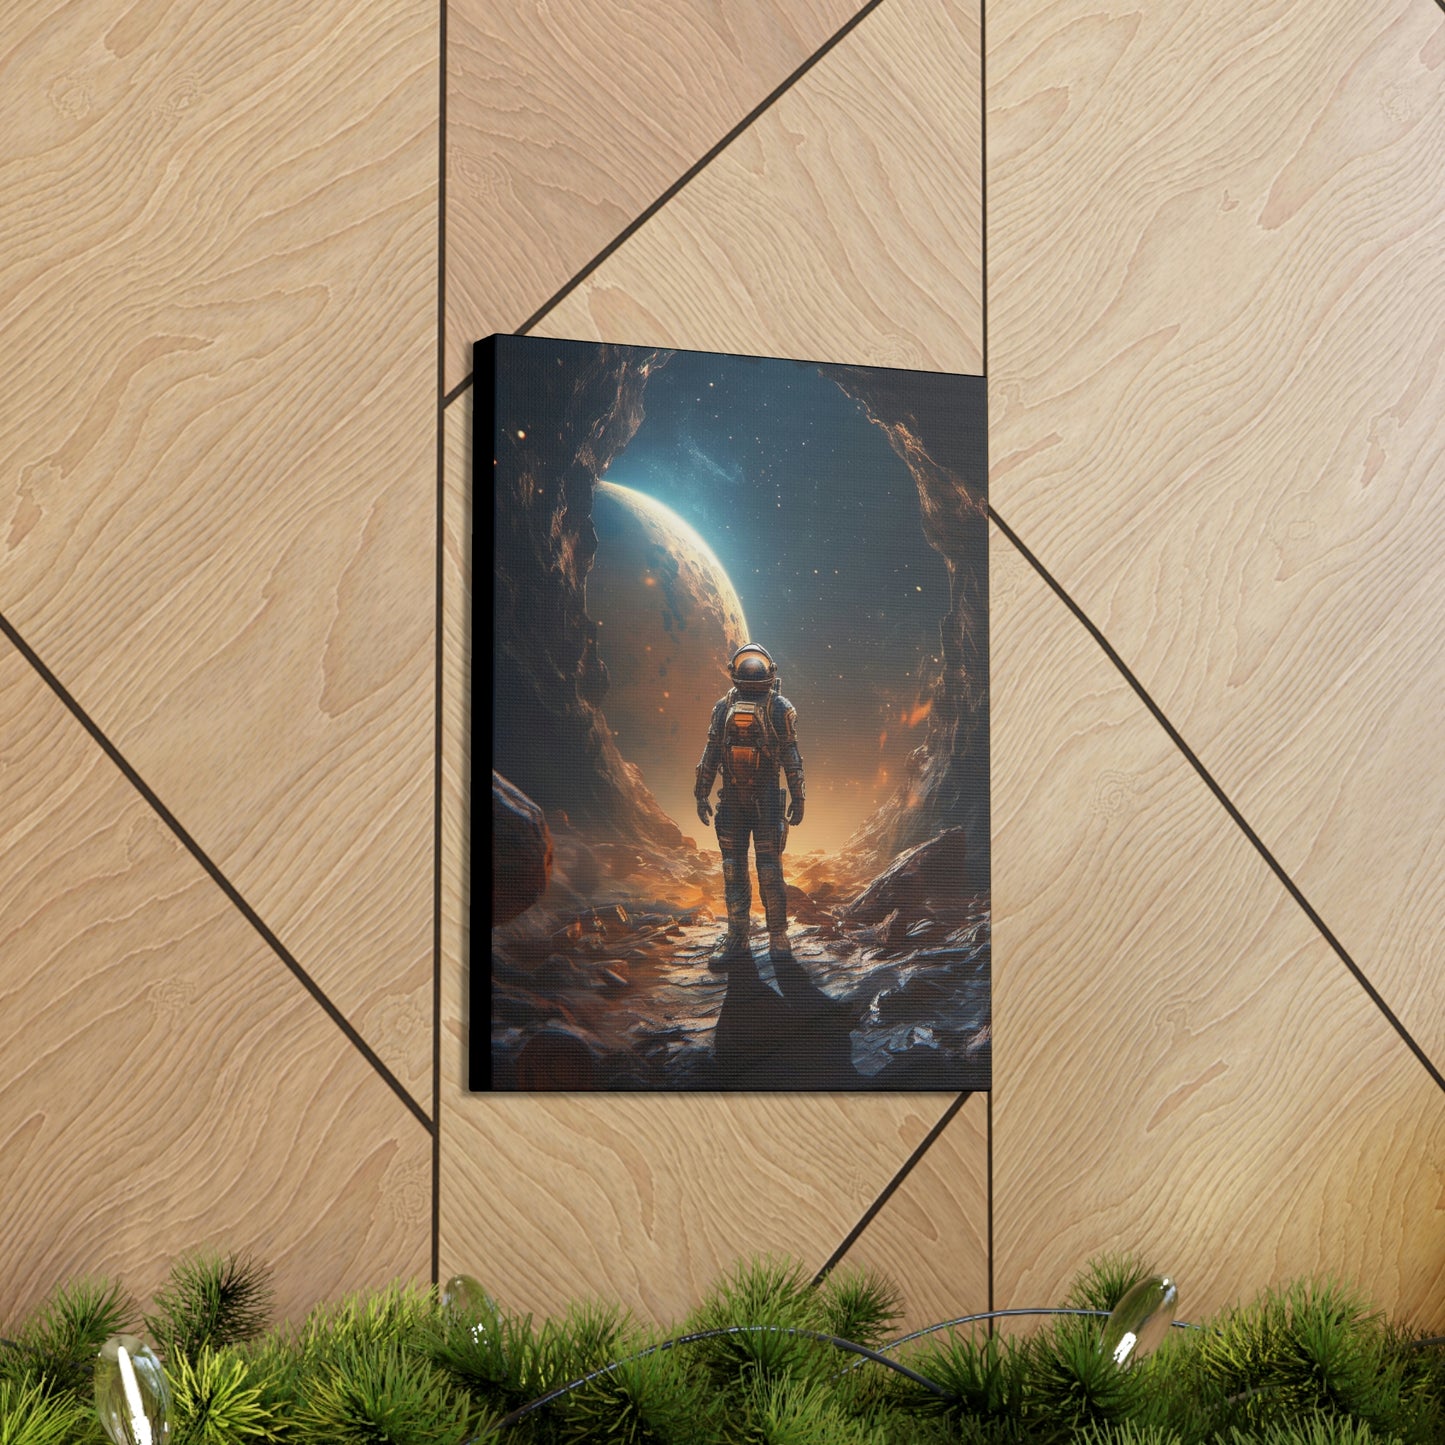 Astronaut On New Planet With Civilization Wall Art